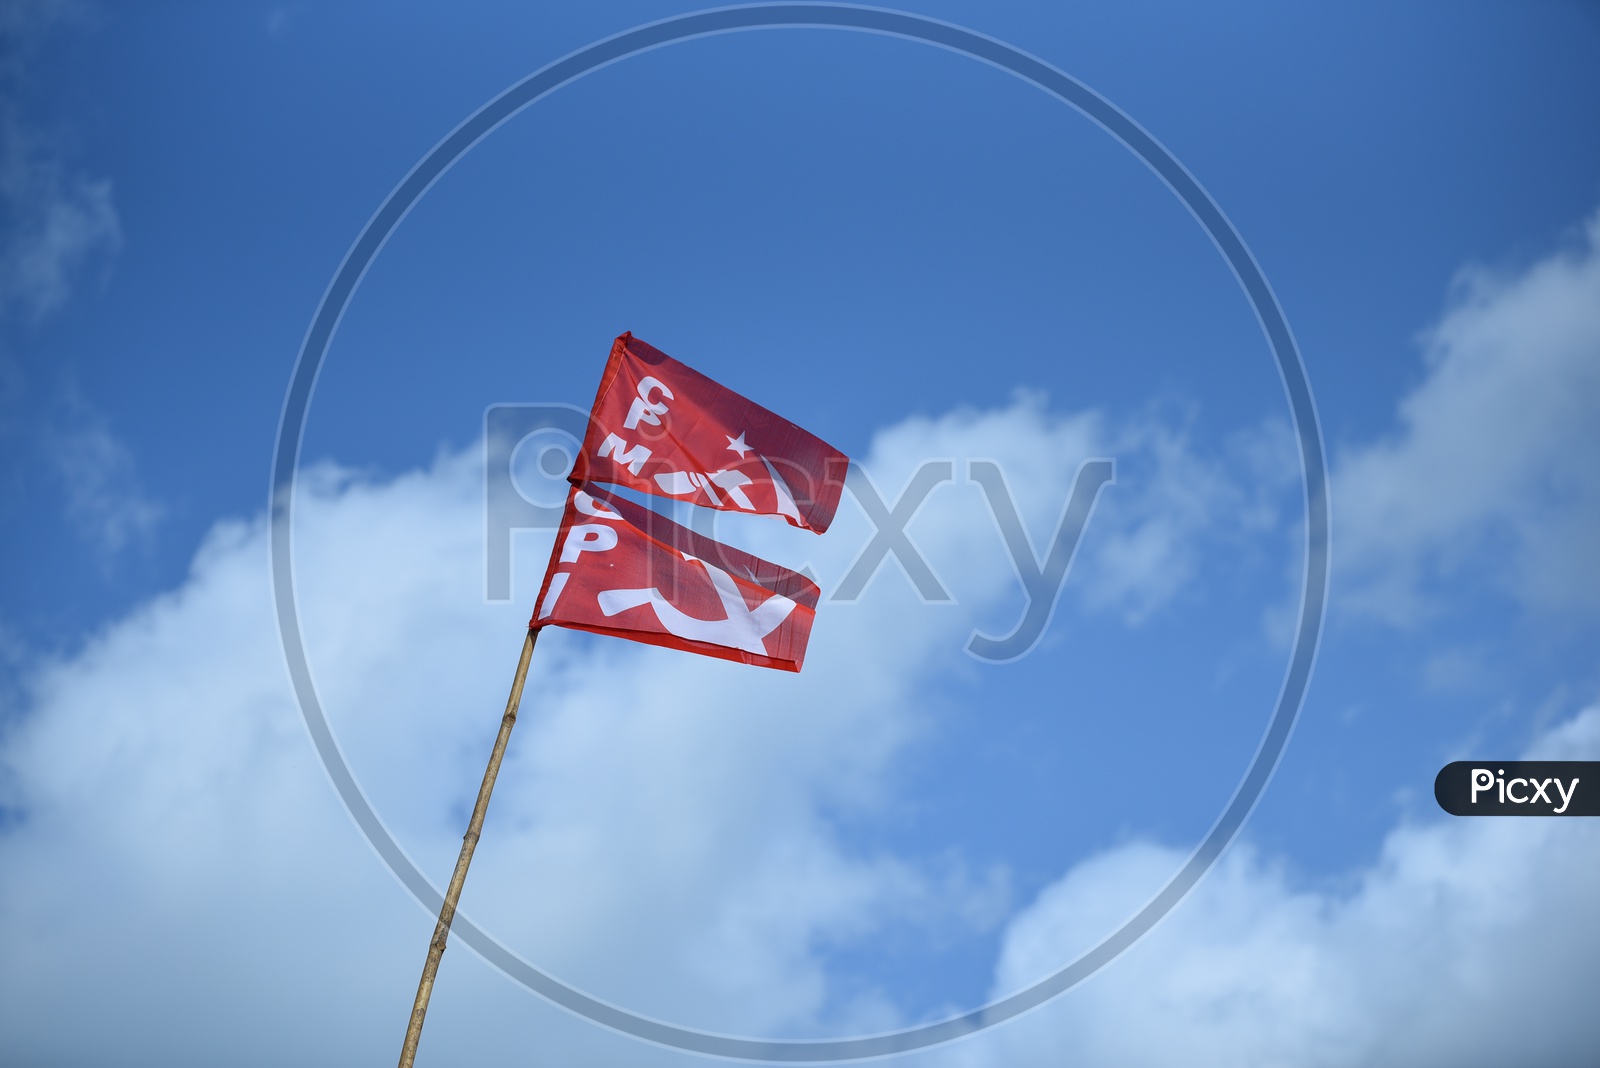 CPM and CPI party flags